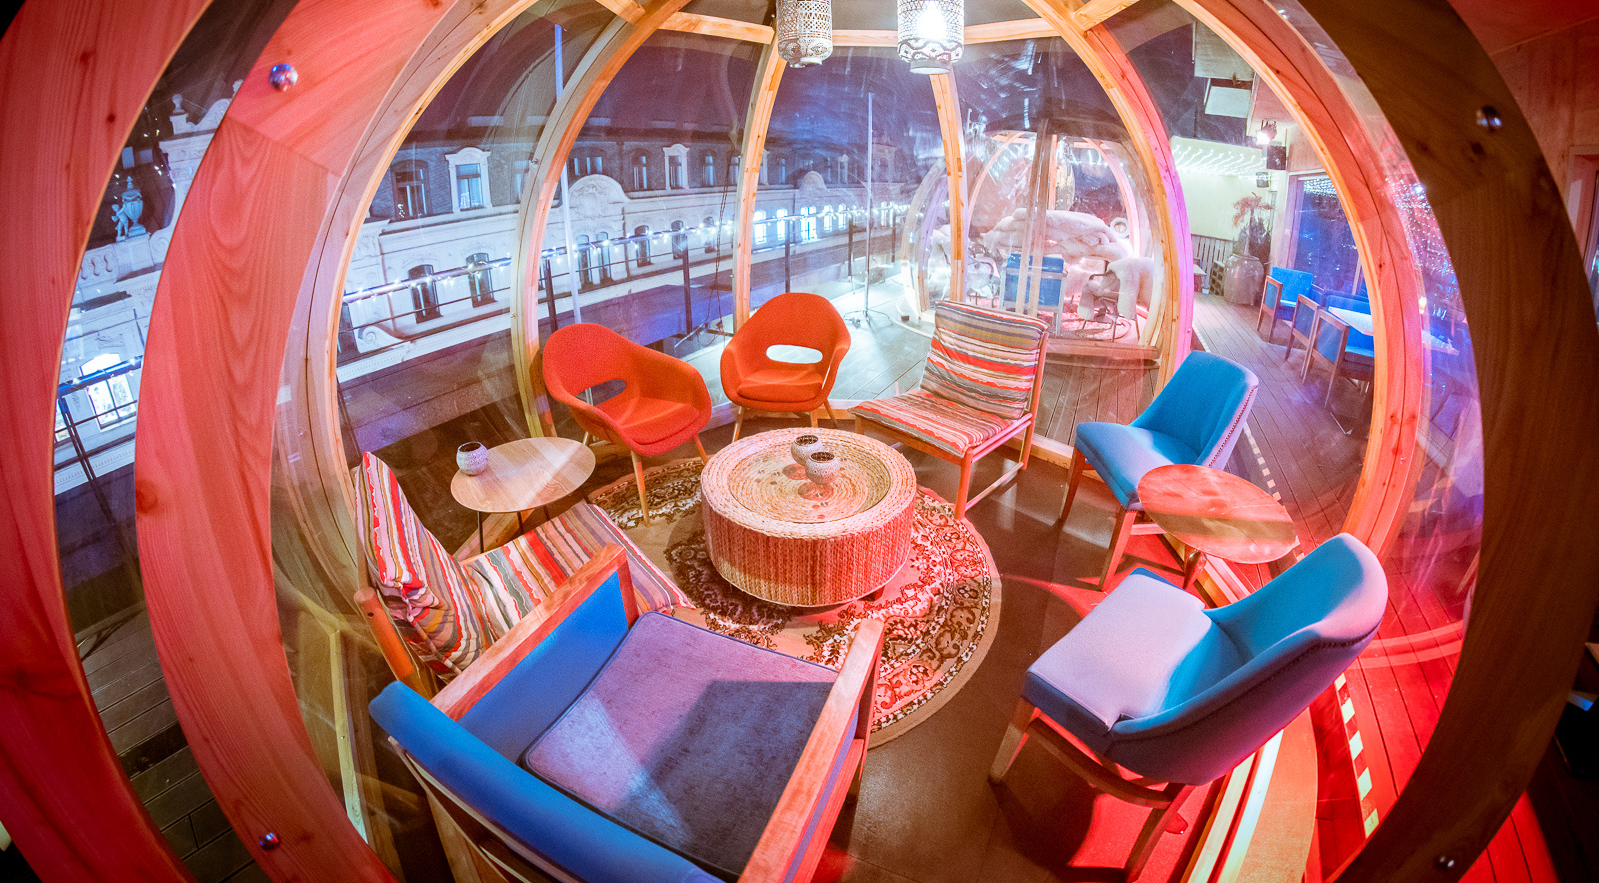 Enjoy the winter on this rooftop bar in Prague